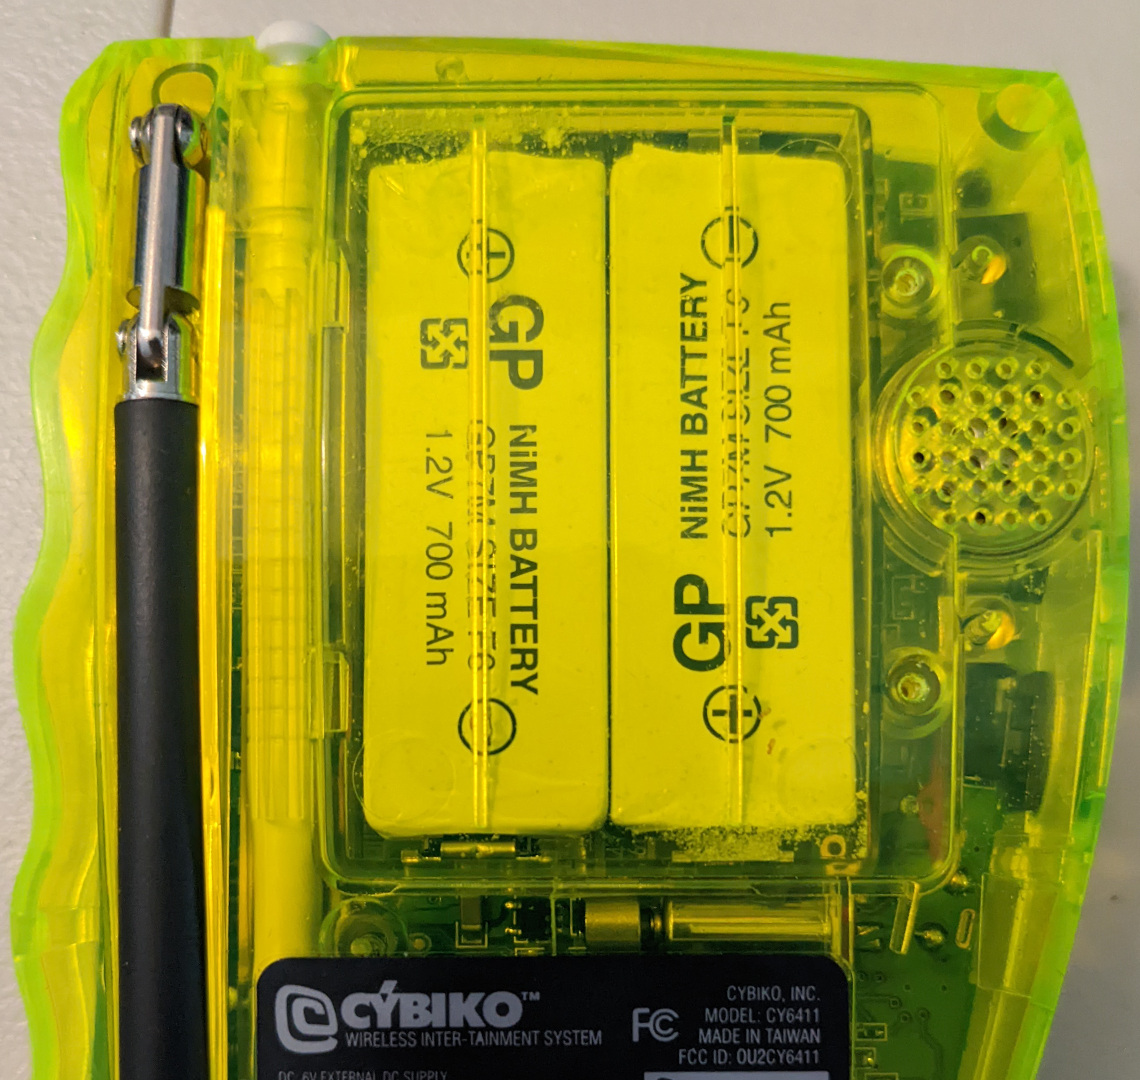 Repairing the Cybiko, a Future Device for 90s Teens - Classy Nemesis